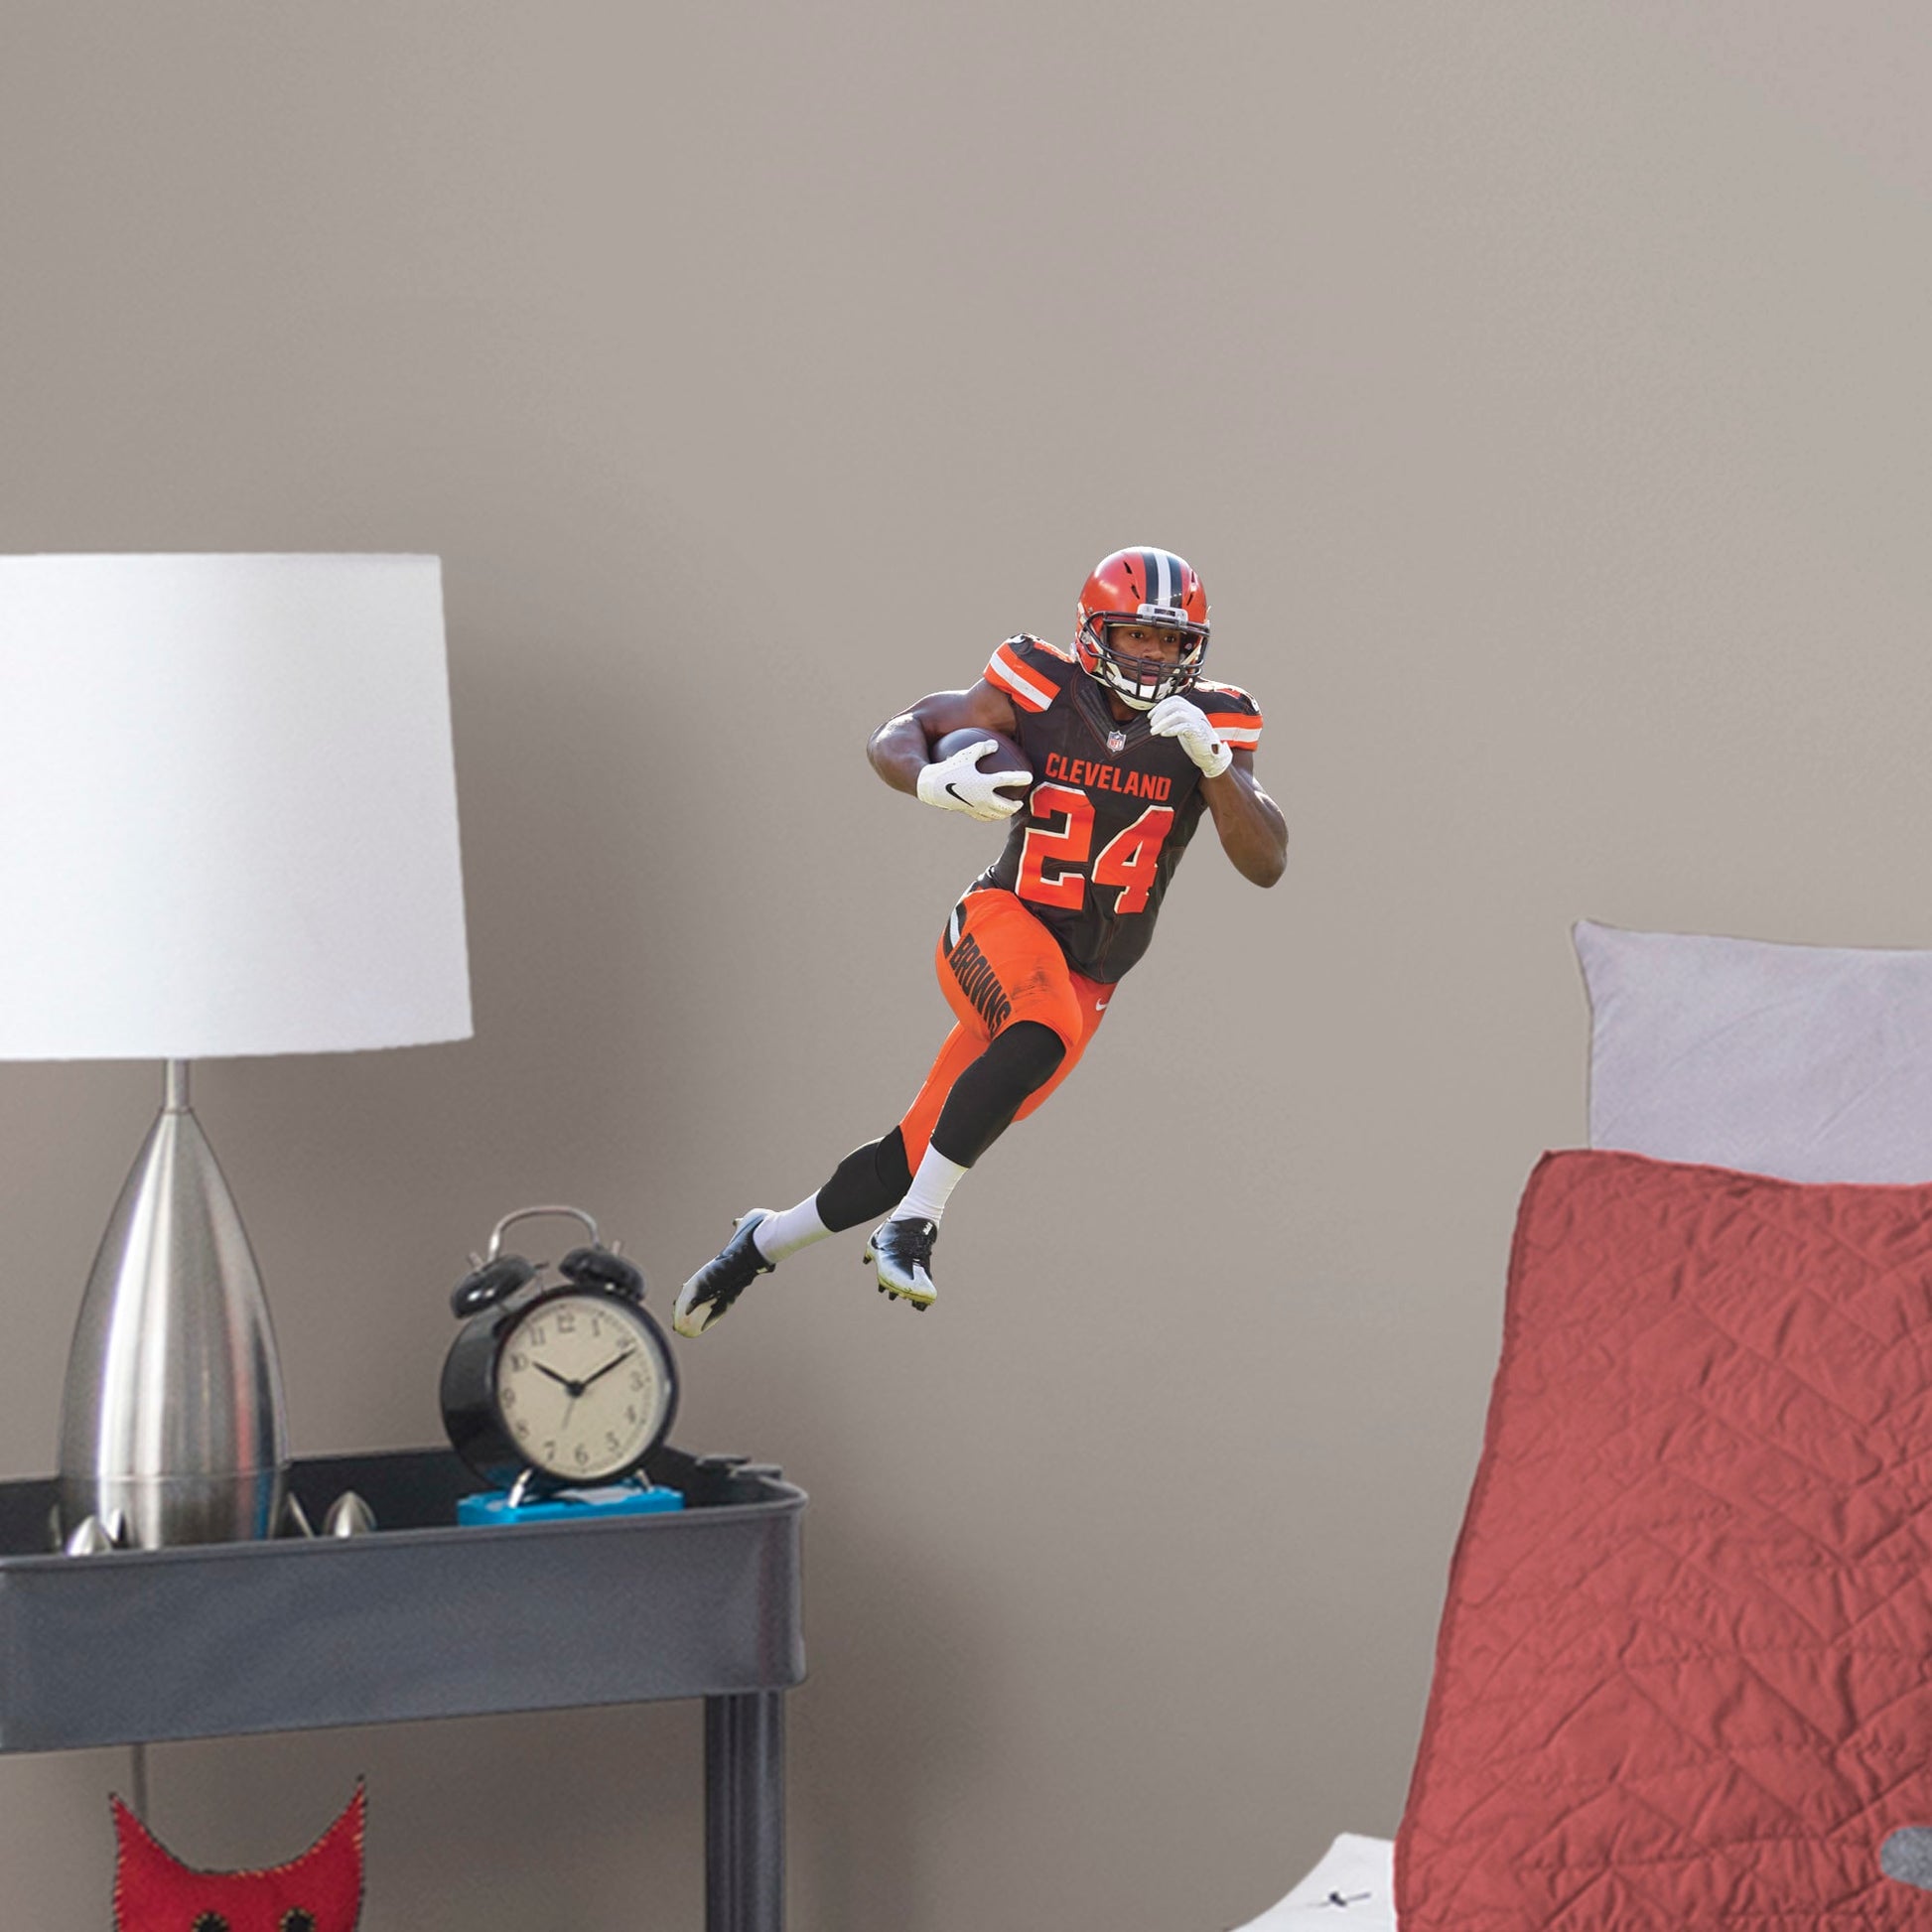 X-Large Athlete + 2 Decals (28"W x 36"H) Your favorite running back has the ball and is zooming down the field in this dynamic, photo-real wall decal. Celebrate Nick Chubb's brilliant career, from winning SEC Freshman of the Year back at Georgia to his 2019 Pro Bowl appearance with the Browns. This is a high-quality gift for any fan who can't wait to see No. 24 dance through the defenders in his next game.